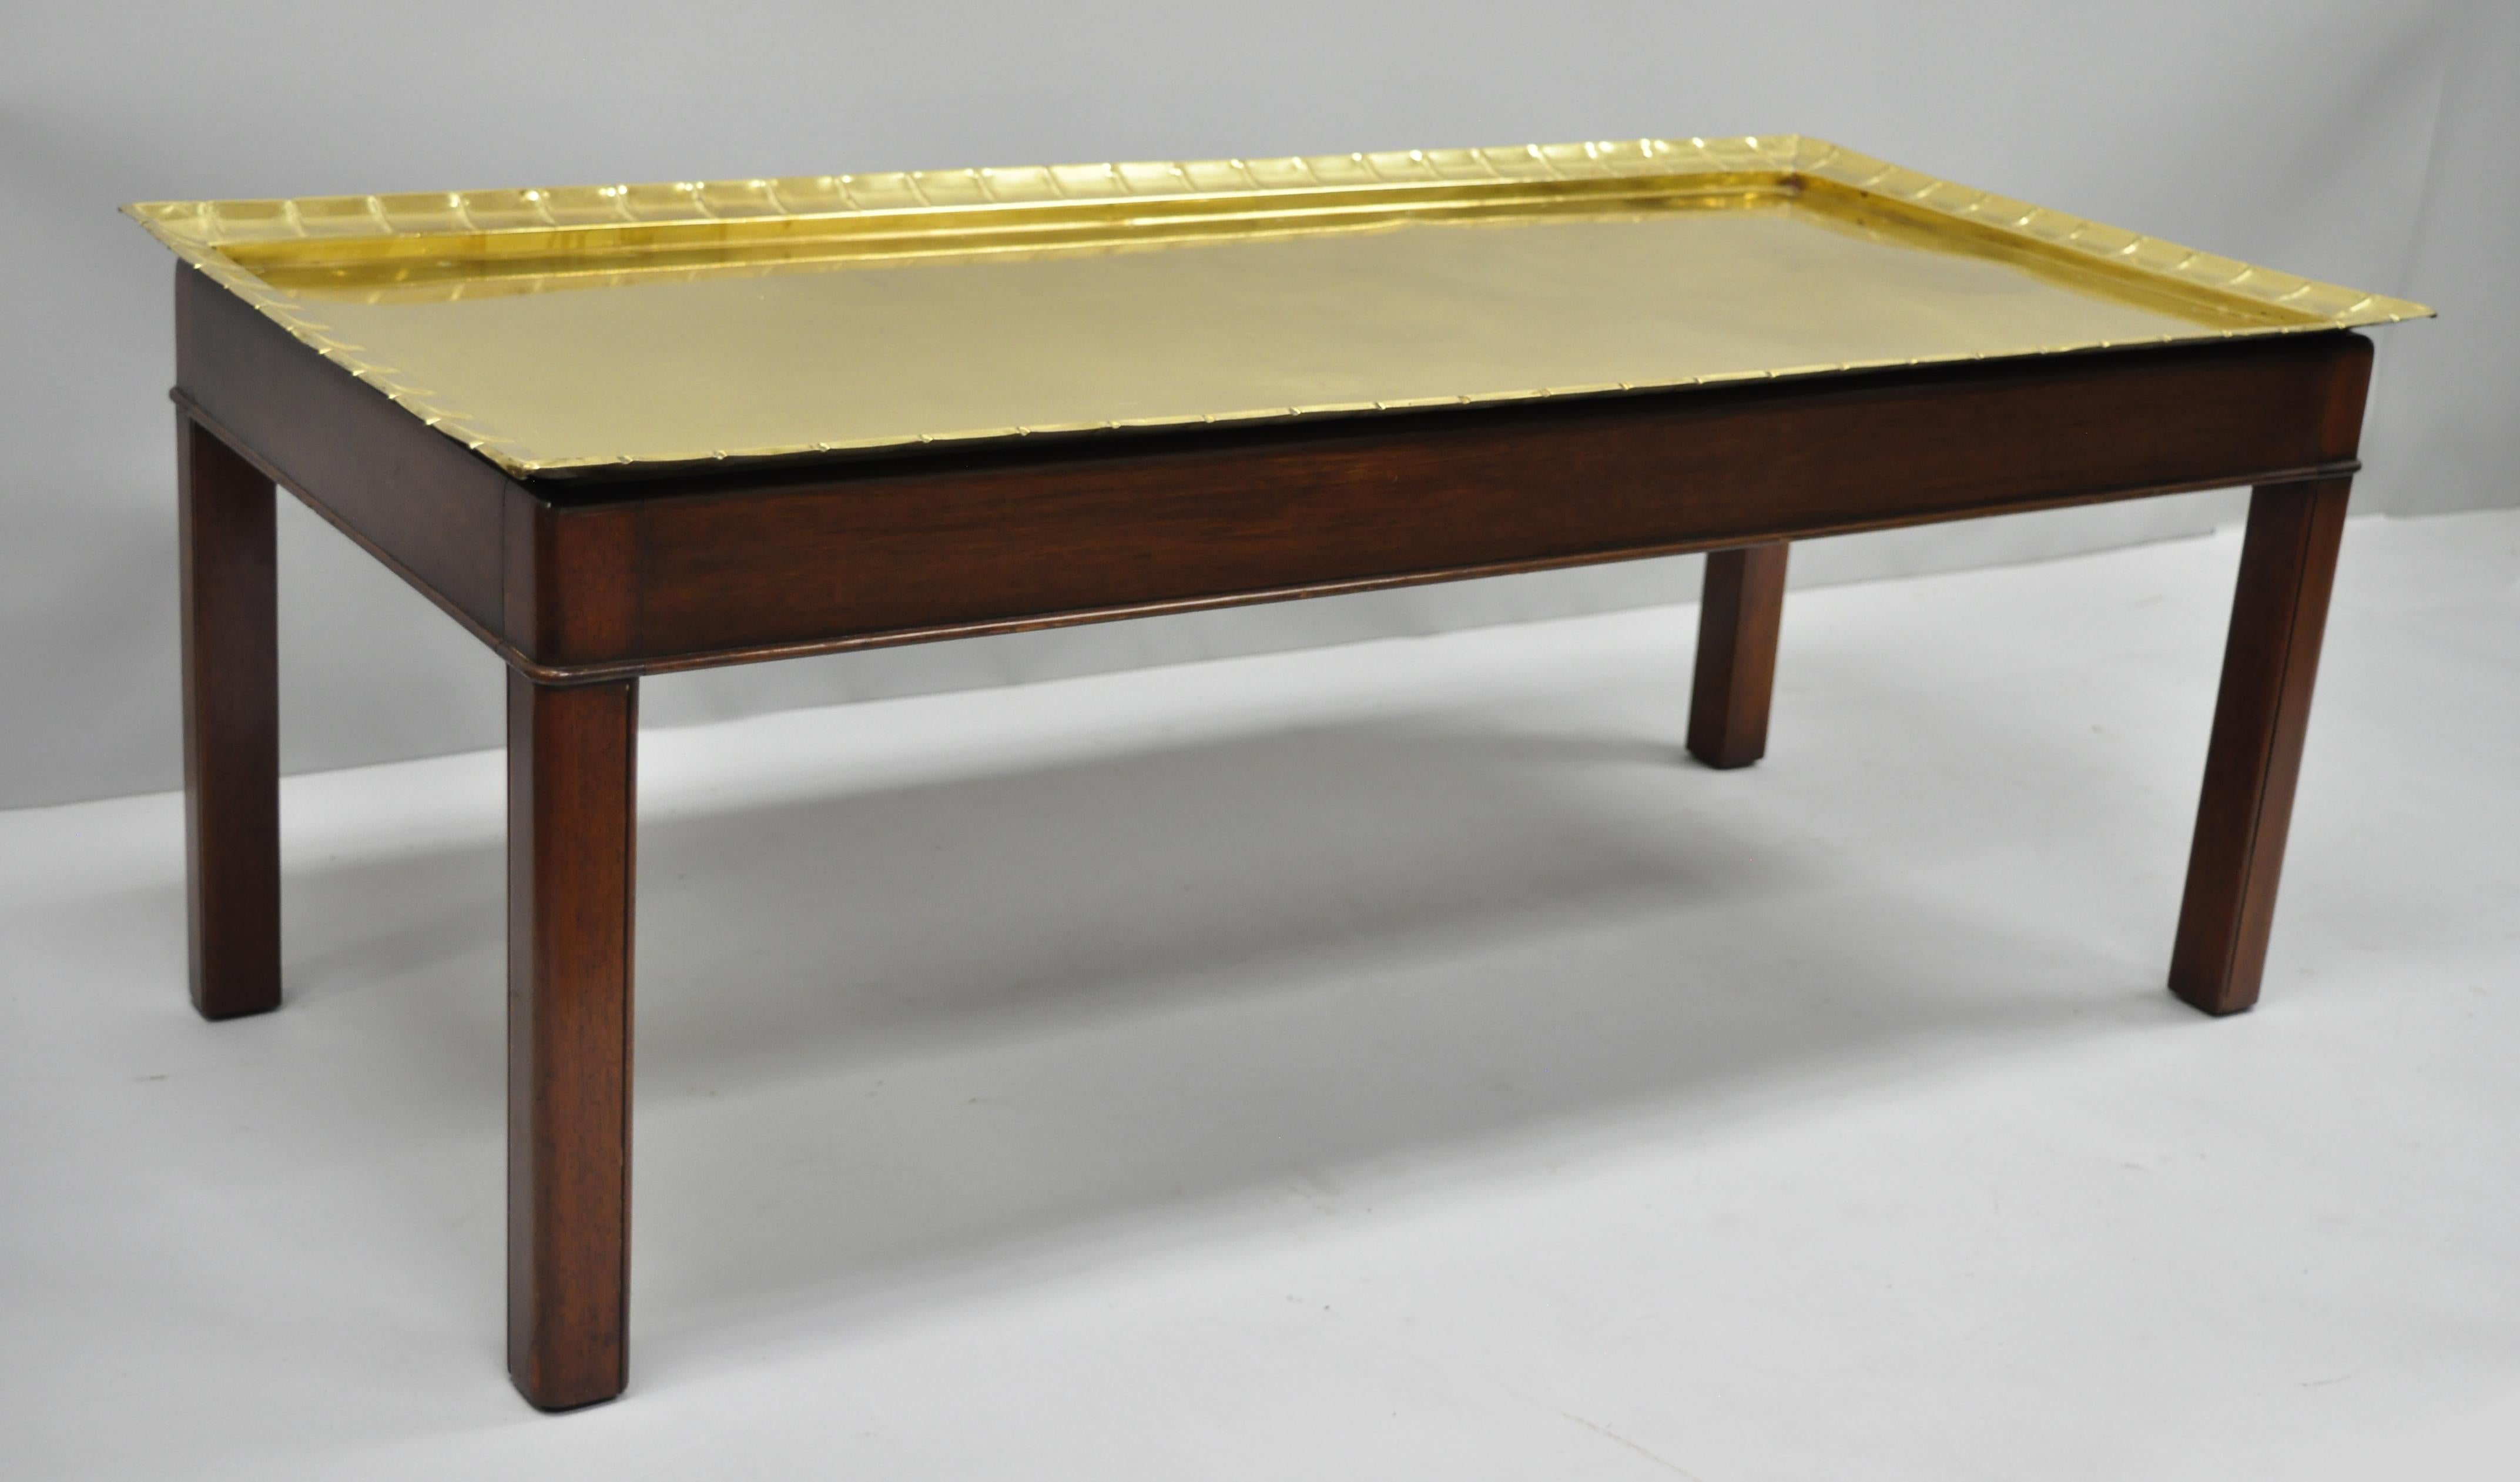 Early 20th century English Campaign style mahogany and scalloped edge brass tray top Georgian style rectangular coffee table. Item features a solid brass removable tray top with riveted iron supports to the underside, shapely scalloped edge, solid